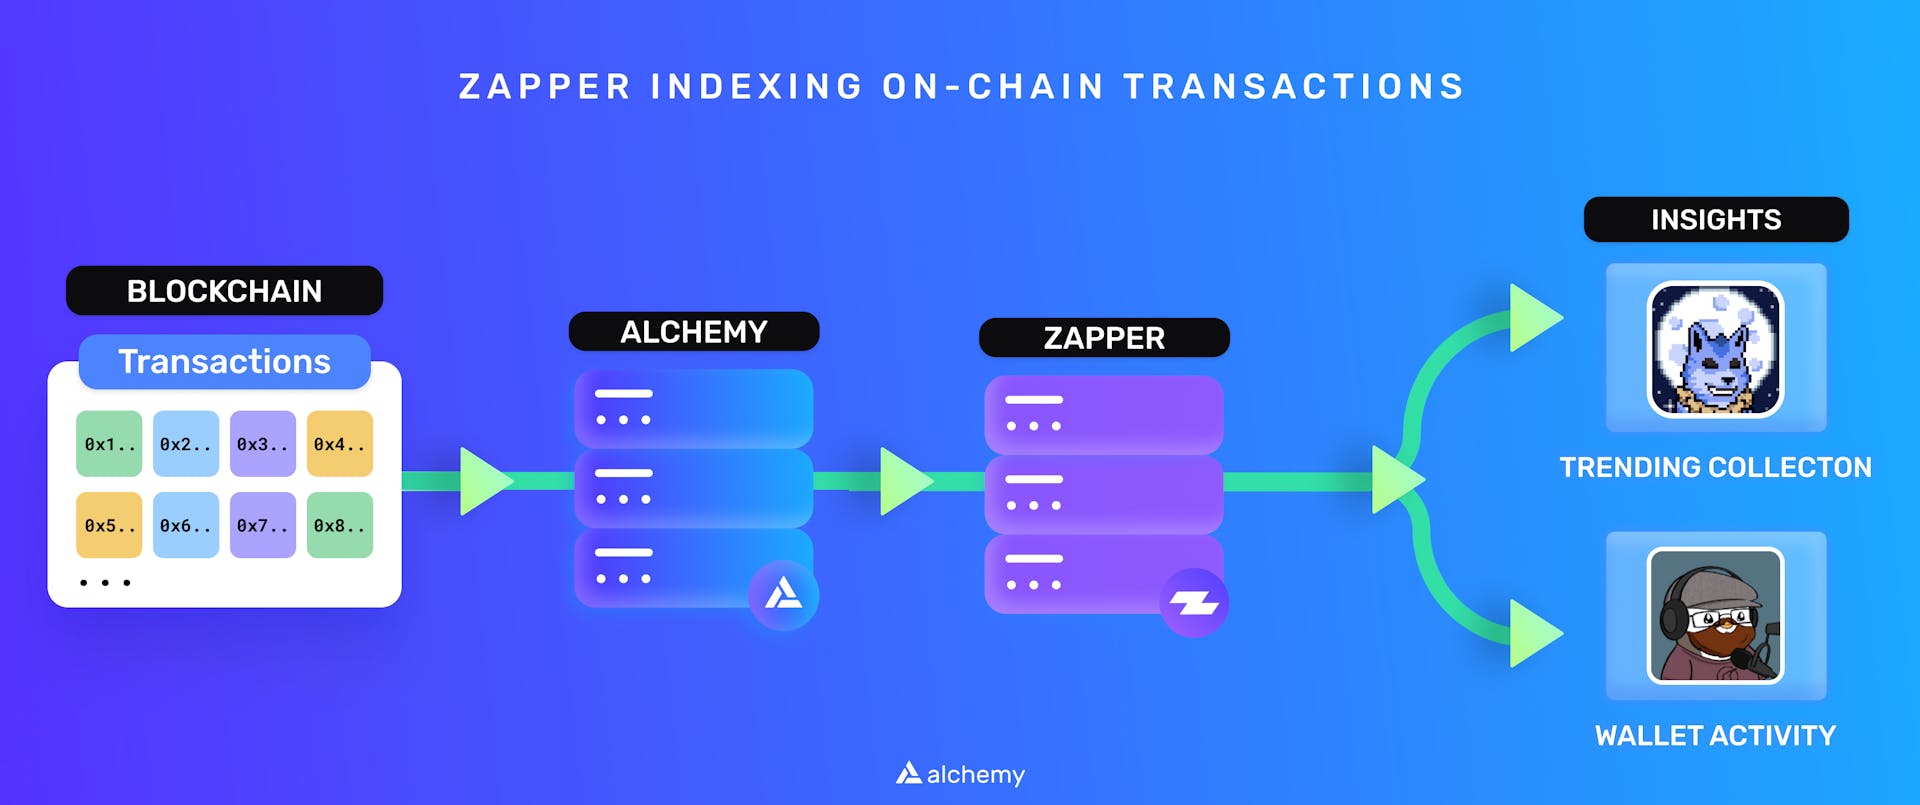 Zapper indexes the blockchain with Alchemy infrastructure 